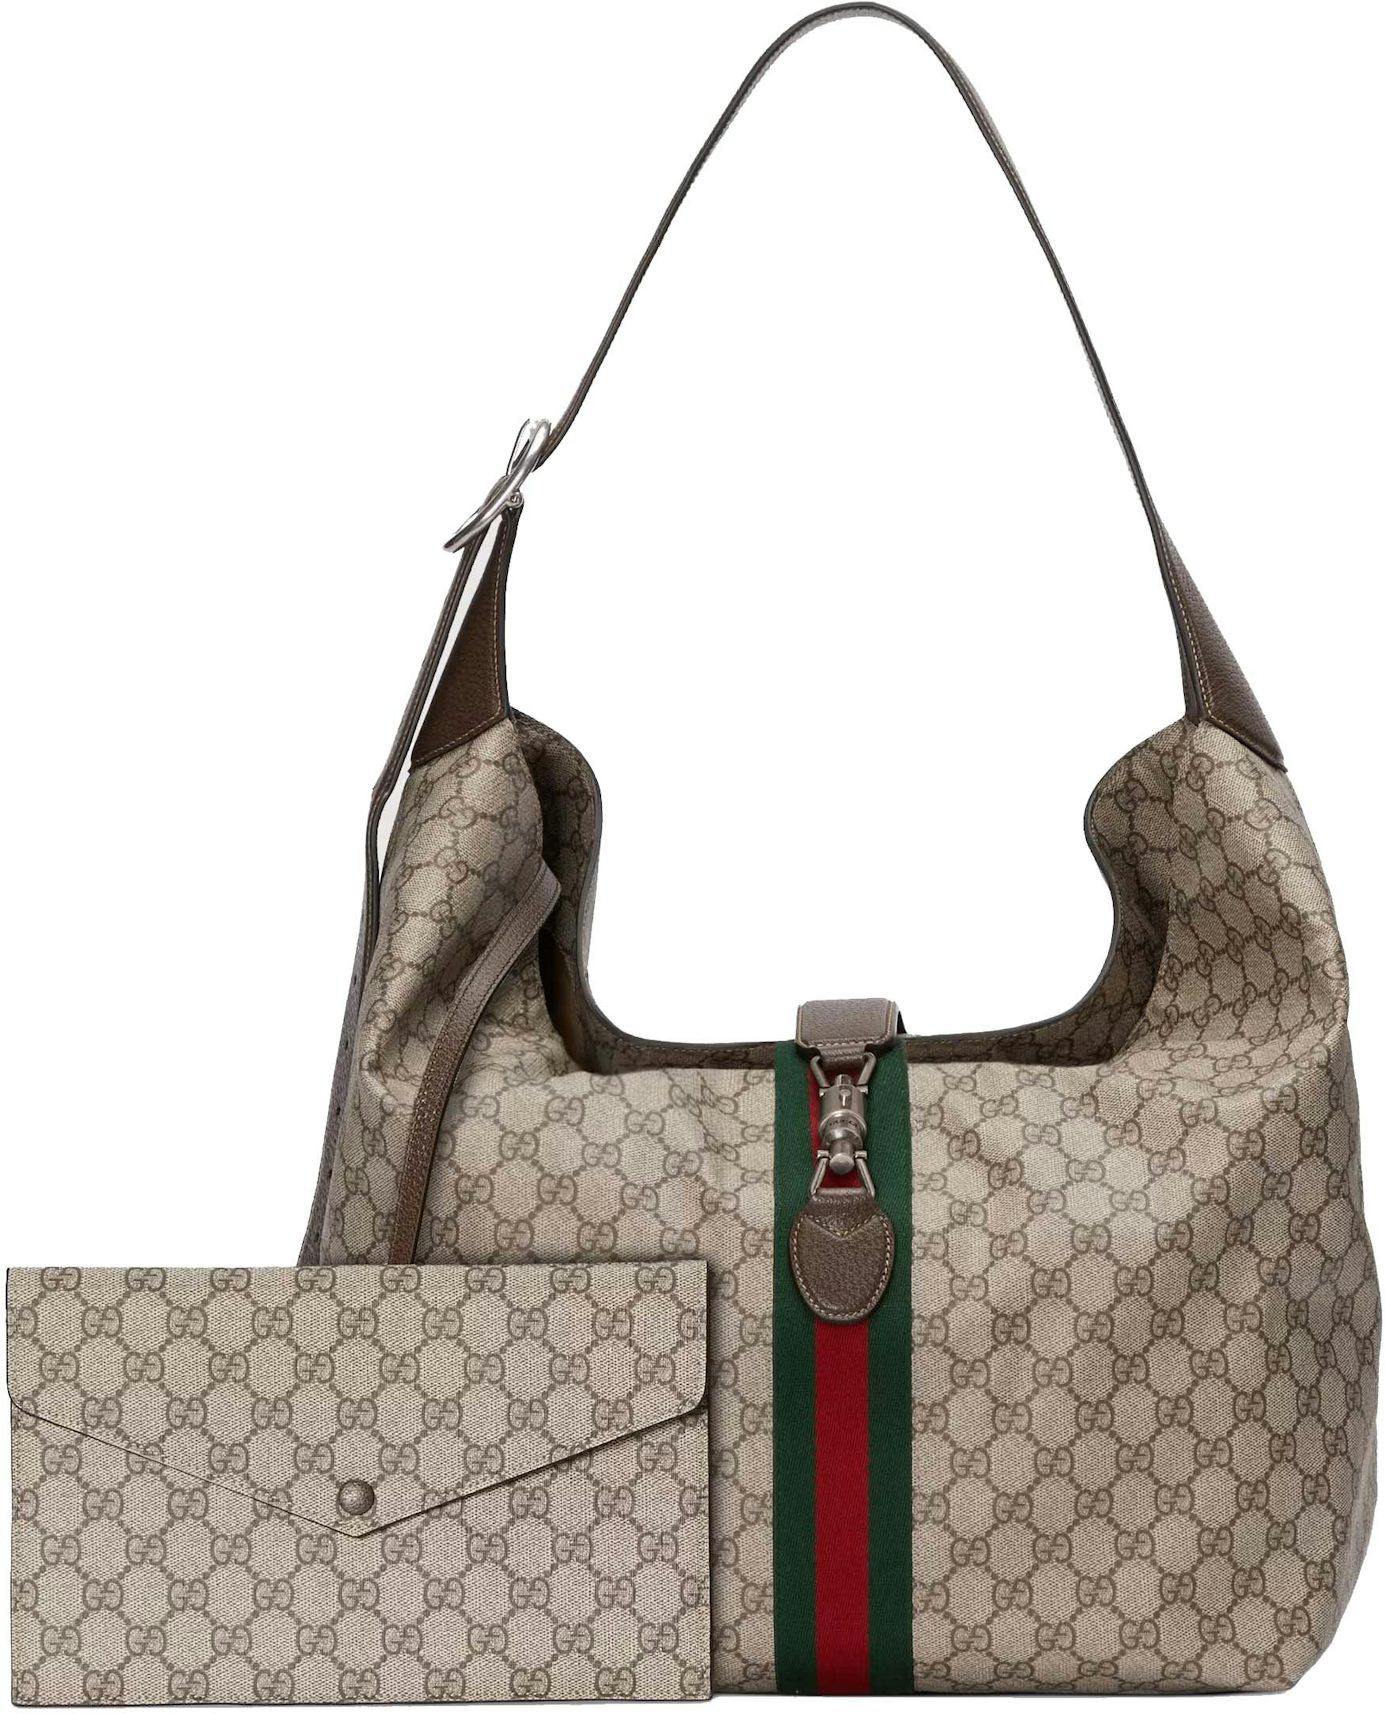 Jackie 1961 Small Leather Shoulder Bag in Black - Gucci